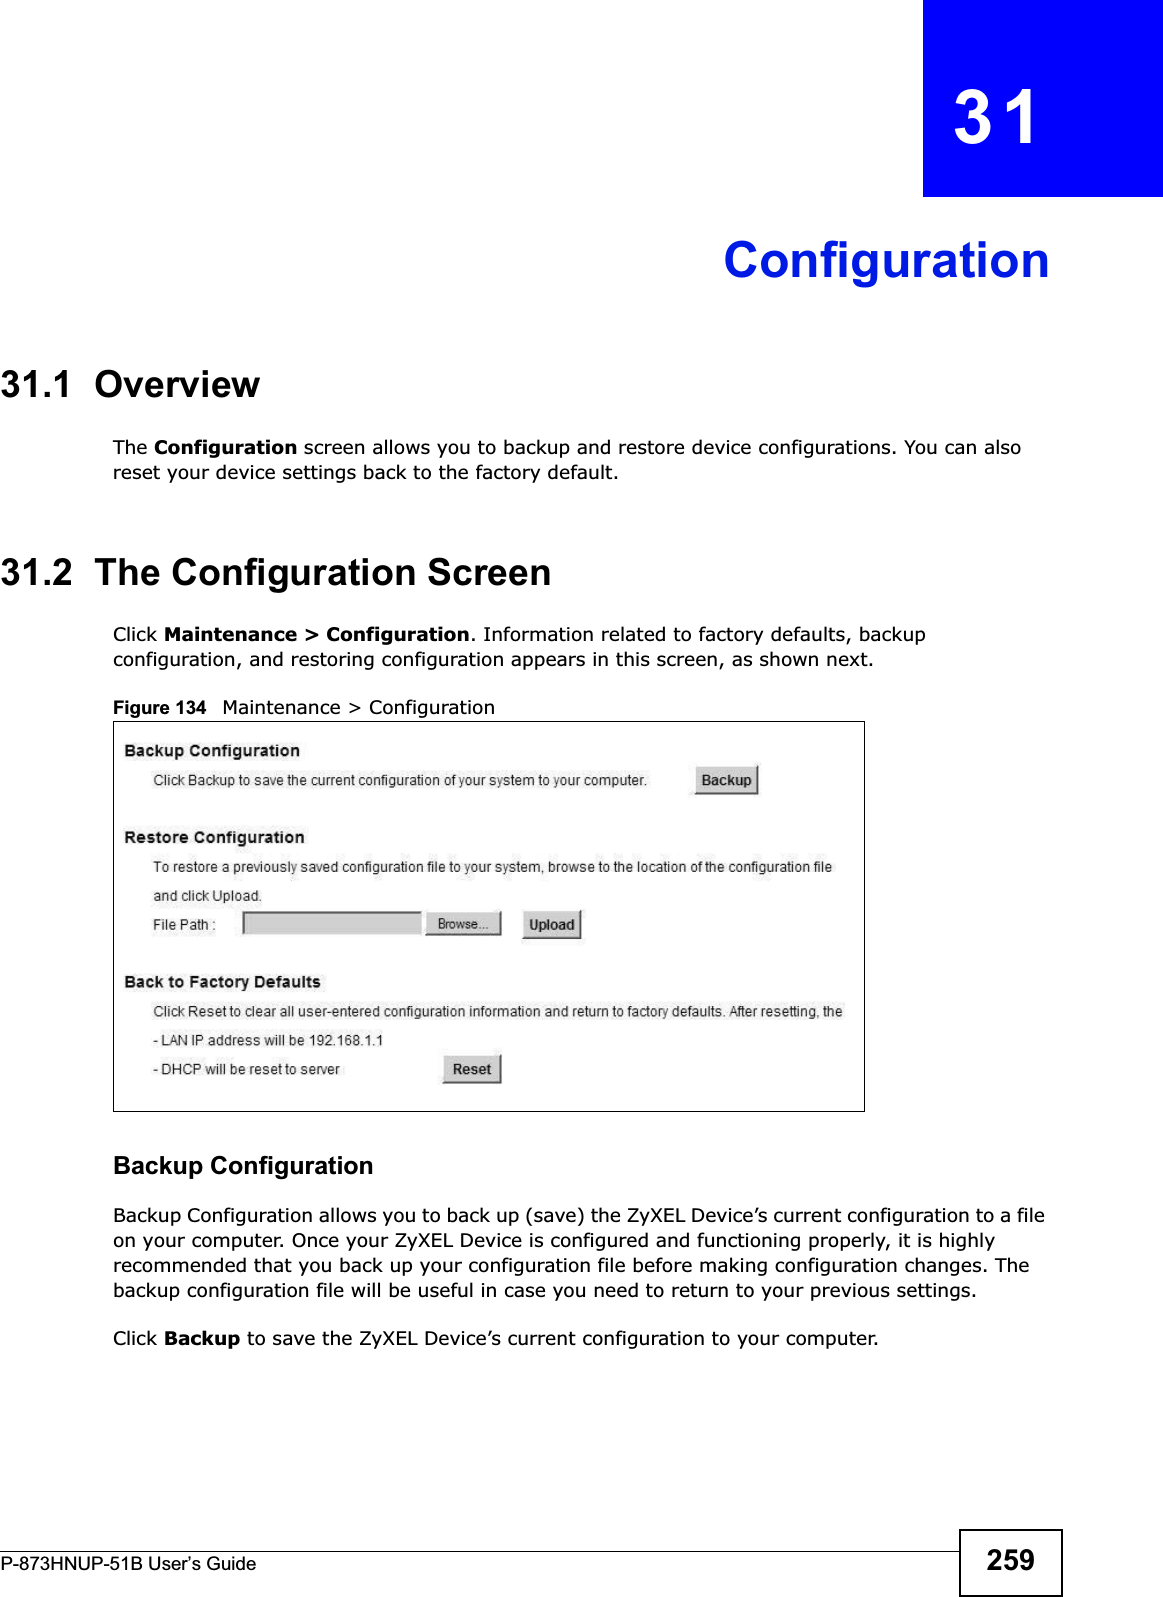 P-873HNUP-51B User’s Guide 259CHAPTER   31Configuration31.1  OverviewThe Configuration screen allows you to backup and restore device configurations. You can also reset your device settings back to the factory default.31.2  The Configuration Screen Click Maintenance &gt; Configuration. Information related to factory defaults, backup configuration, and restoring configuration appears in this screen, as shown next.Figure 134   Maintenance &gt; ConfigurationBackup Configuration Backup Configuration allows you to back up (save) the ZyXEL Device’s current configuration to a file on your computer. Once your ZyXEL Device is configured and functioning properly, it is highly recommended that you back up your configuration file before making configuration changes. The backup configuration file will be useful in case you need to return to your previous settings. Click Backup to save the ZyXEL Device’s current configuration to your computer.